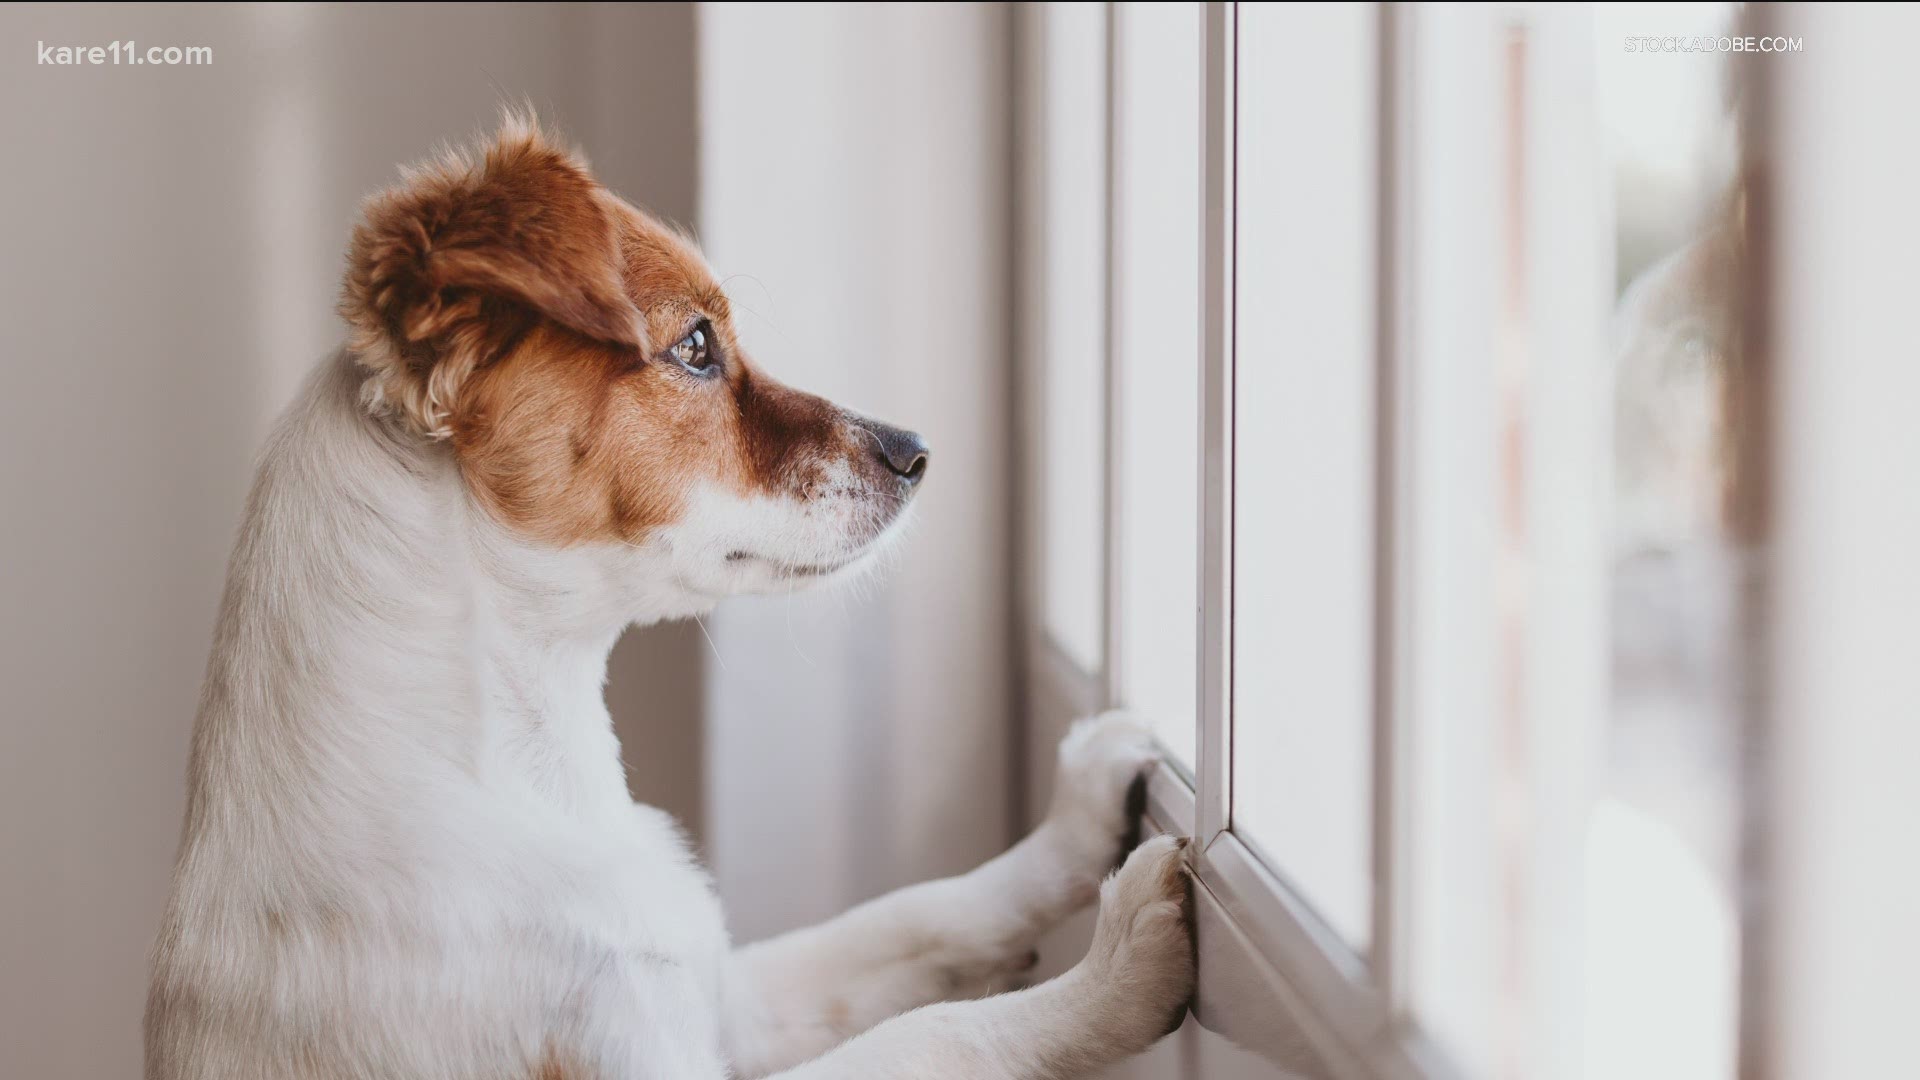 How to handle your pet when the weather outside has you both trapped indoors